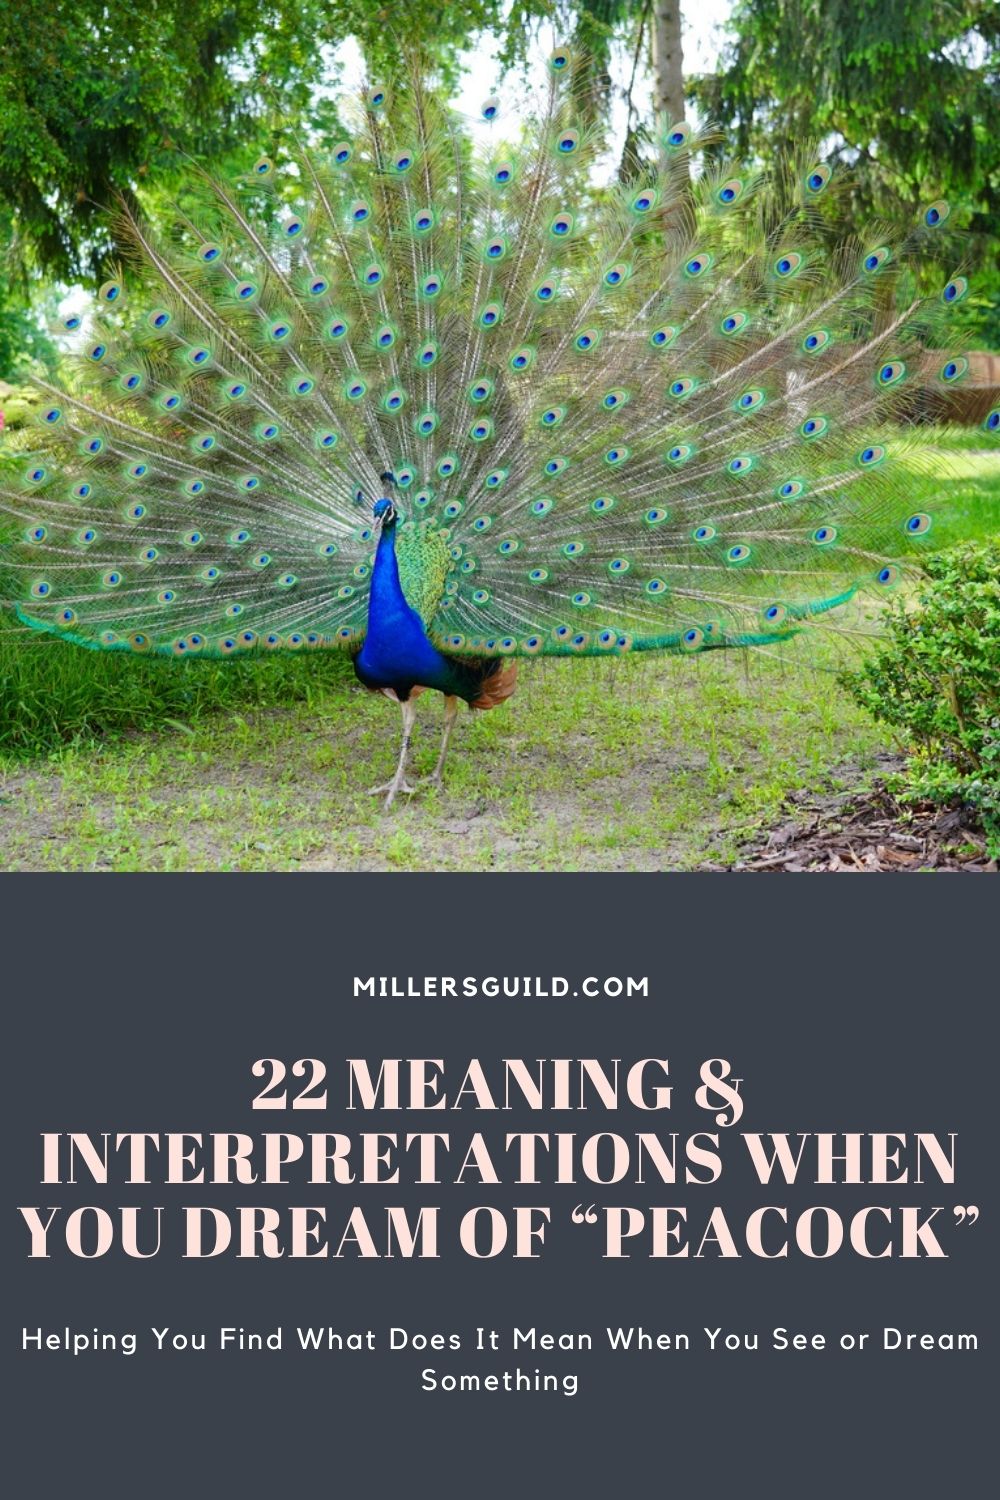 22 Meaning & Interpretations When You Dream of “Peacock”